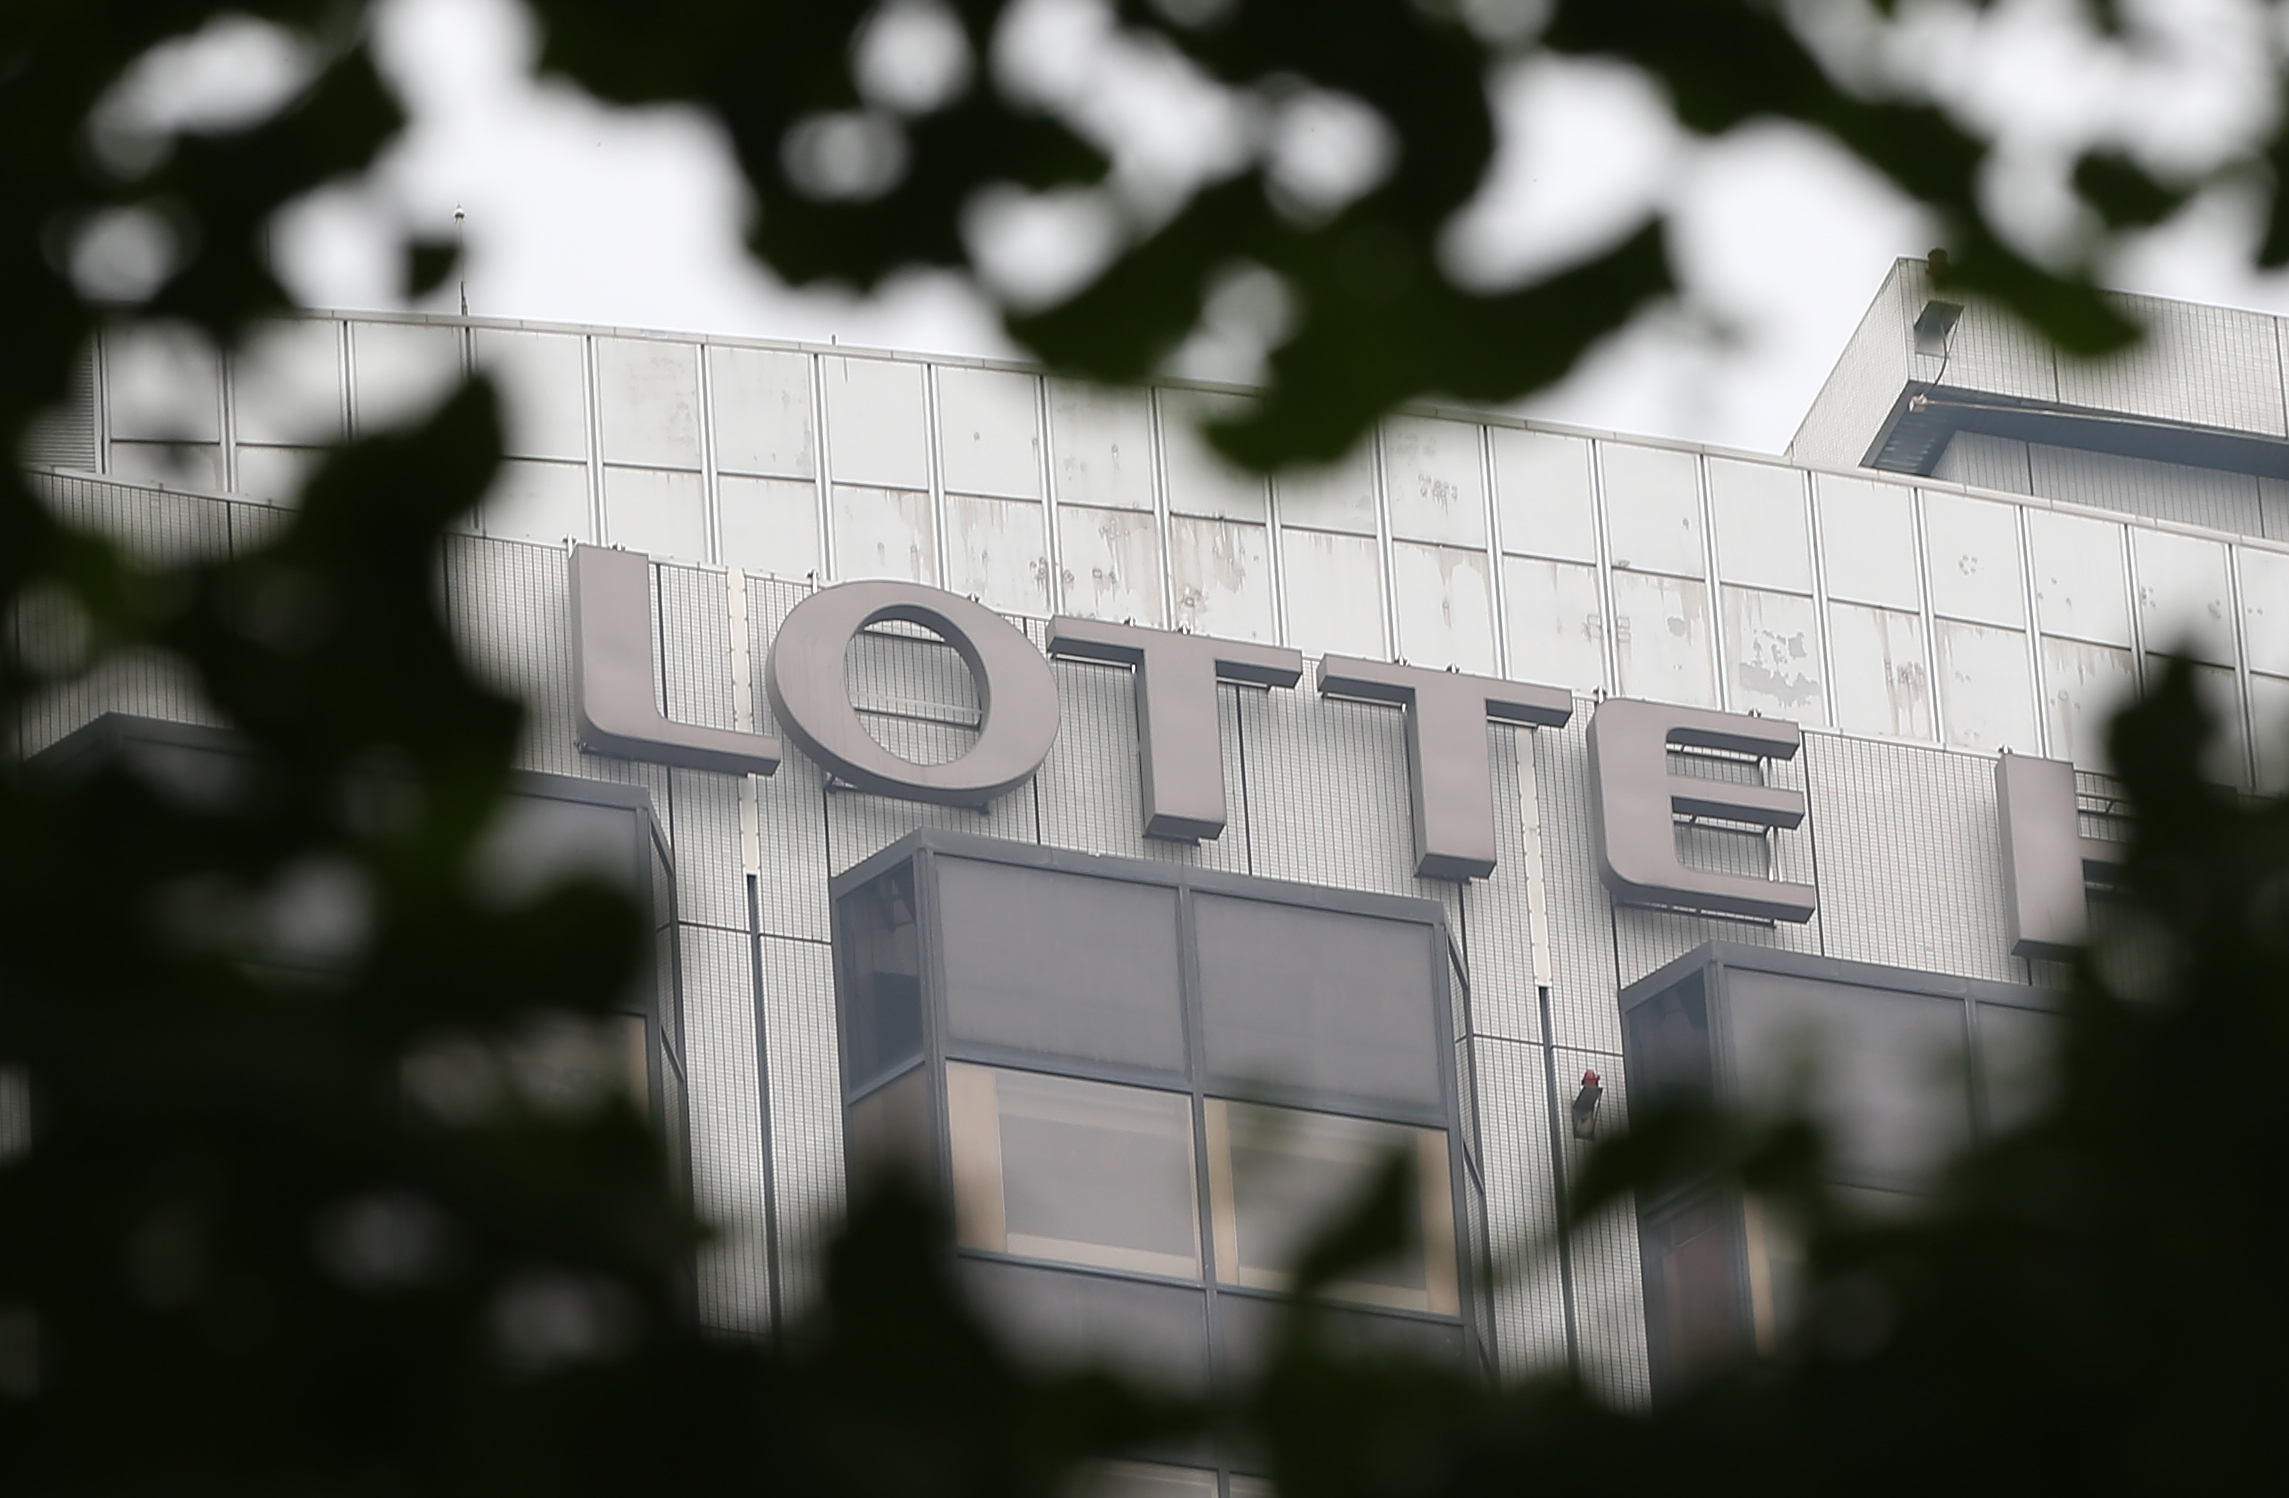 TO GO WITH: SKorea-economy-company-Lotte-feud, FOCUS by Giles Hewitt A photo taken on July 29, 2015 shows a Lotte logo in Seoul. With bitterly feuding siblings, attempted boardroom coups and an act of corporate patricide, the family squabble currently engulfing one of Korea's largest conglomerates makes for compelling drama. Squabbles for control of South Korea's family-run conglomerates, known as "chaebol," have long been staple plotline fare for the country's popular K-dramas, but the real-life Lotte dispute is setting new standards for in-fighting and intrigue. REPUBLIC OF KOREA OUT NO ARCHIVES RESTRICTED TO SUBSCRIPTION USE AFP PHOTO / YONHAP / AFP PHOTO / YONHAP / YONHAP